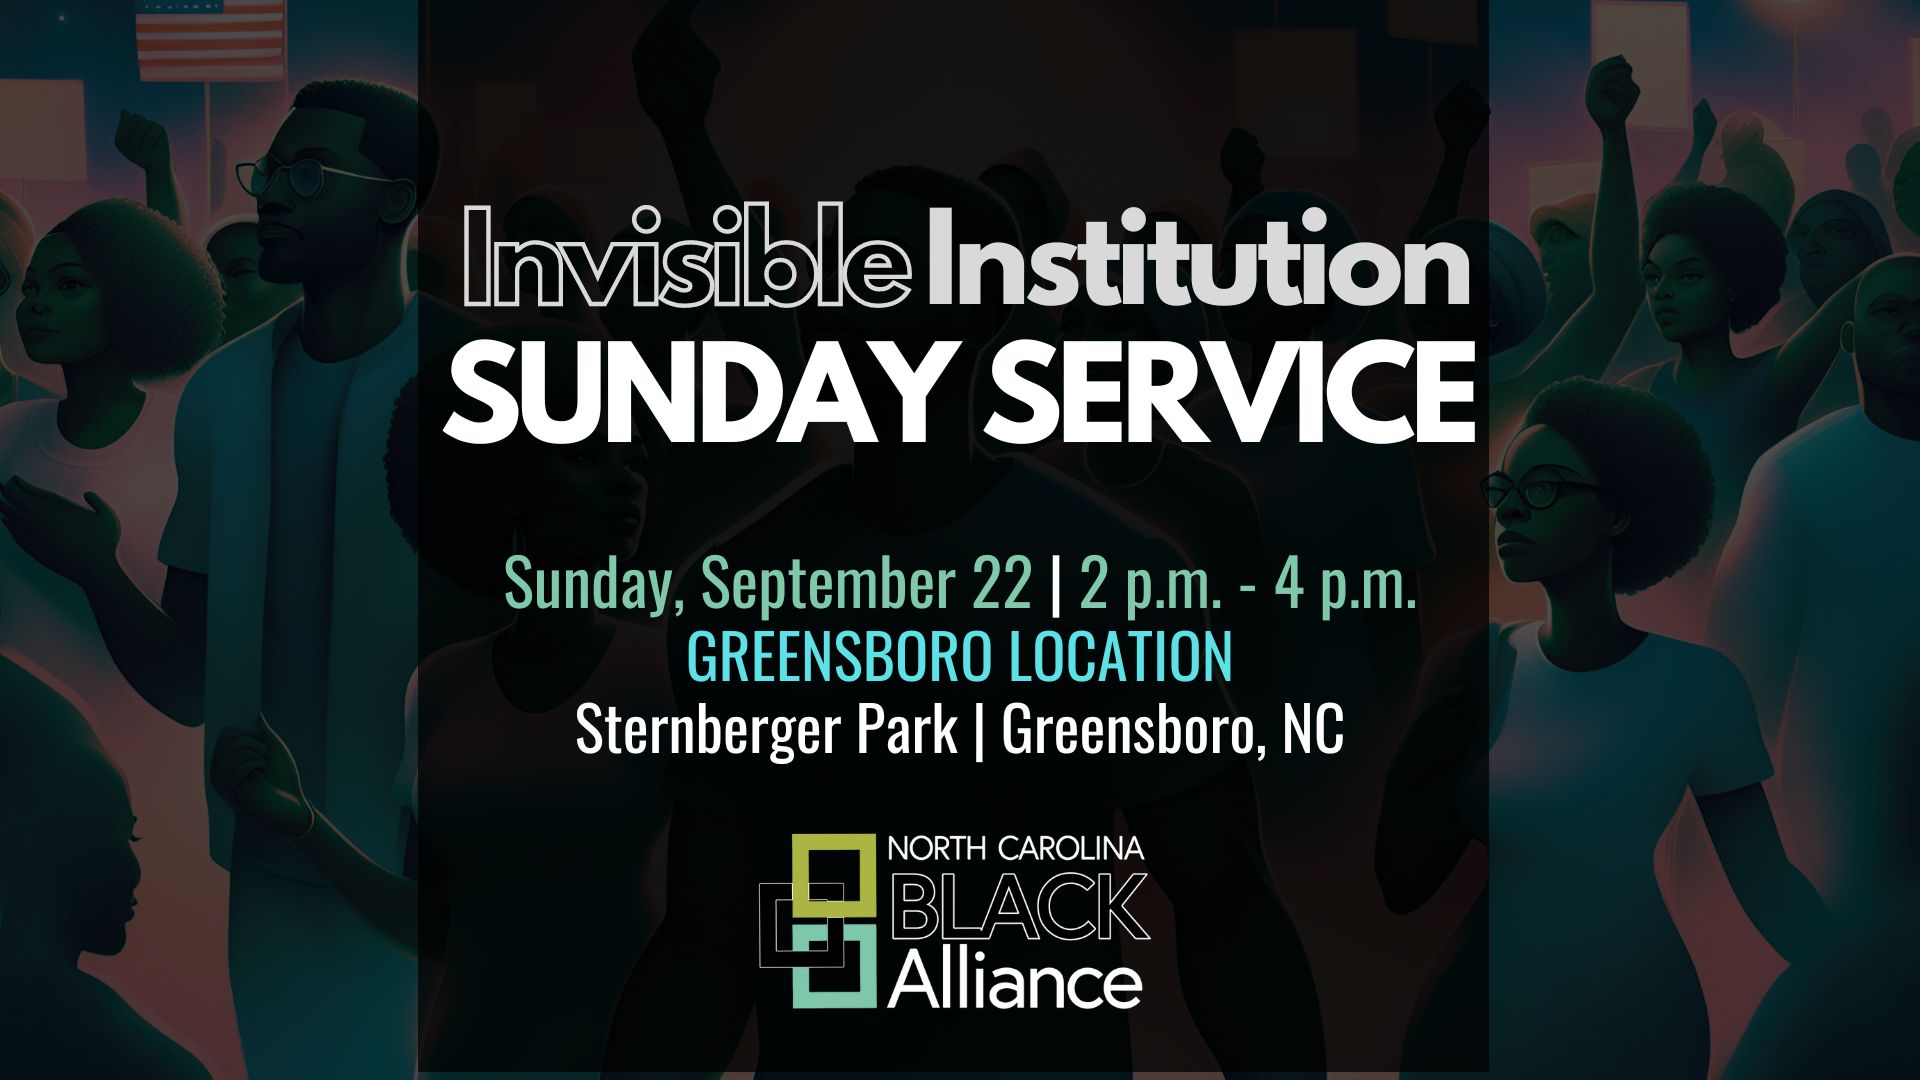 Invisible Institution on September 22 from 2 to 4 p.m.